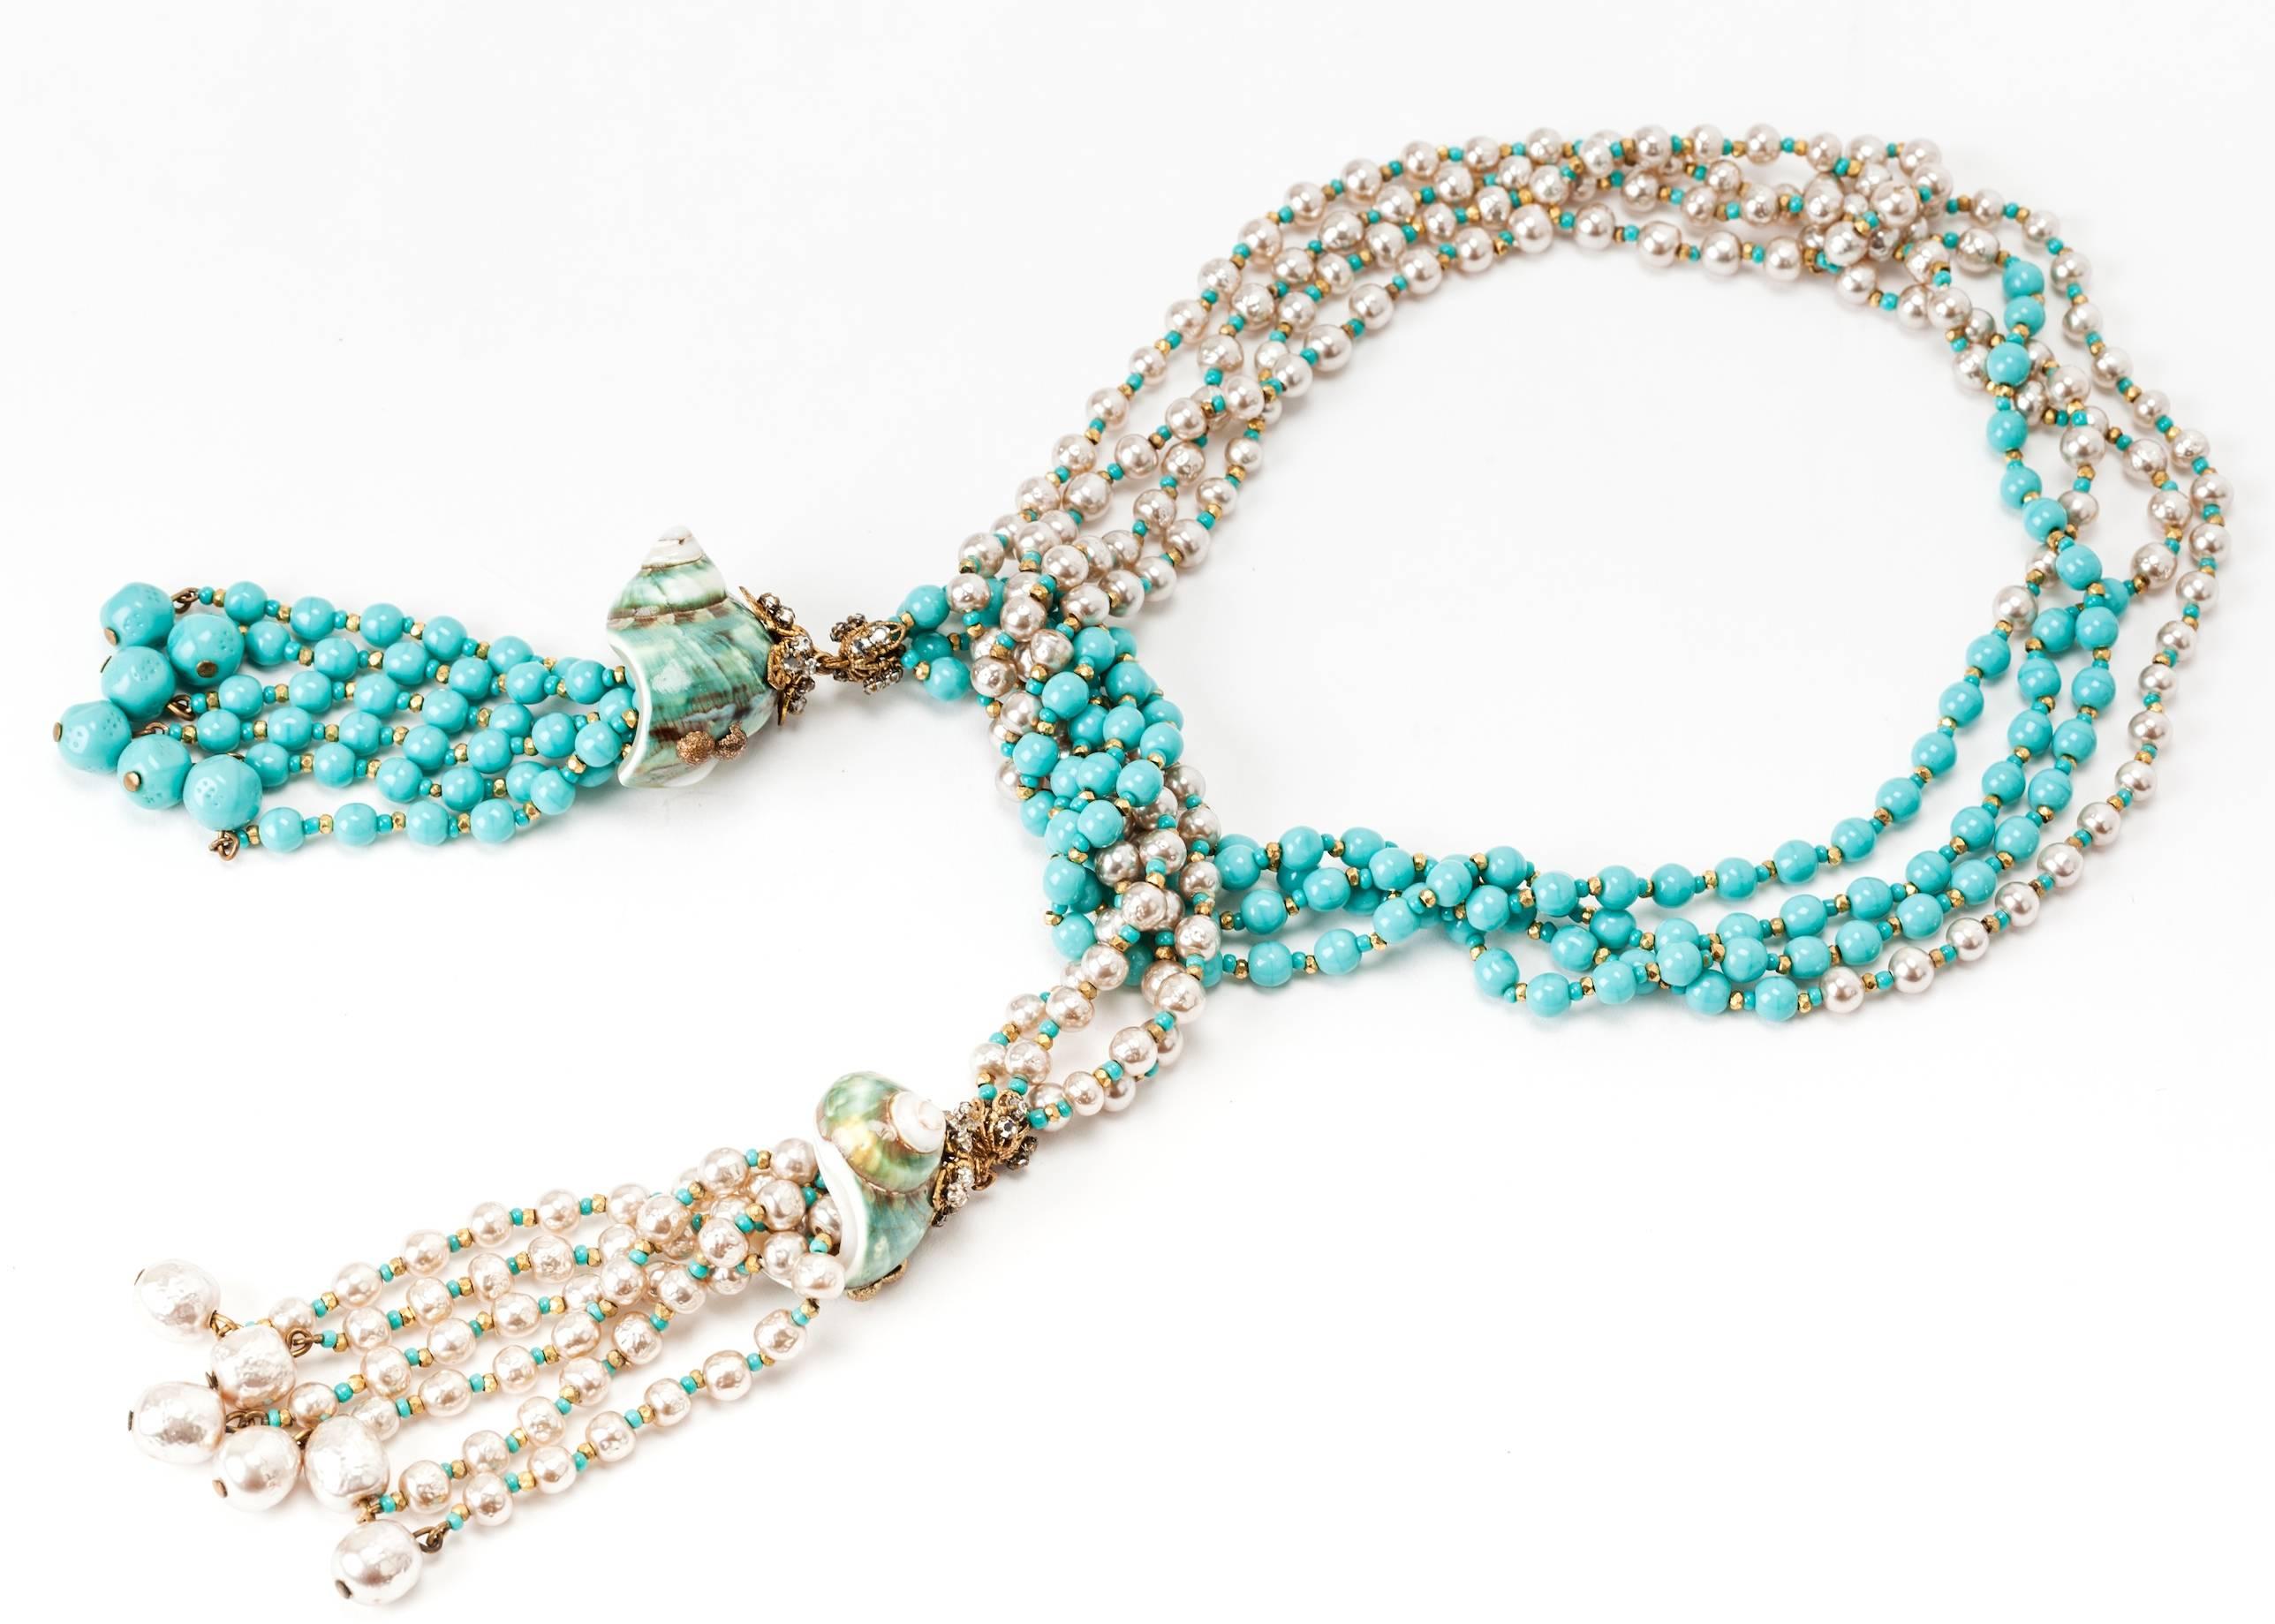 Wonderful, early and rare Miriam Haskell suite composed of a lariat, clip earrings and bracelet. 
Signature Haskell faux pearls are paired with turquoise pate de verre beads with Russian gilt metal and pave rose montee spacers. 
The 4 strand